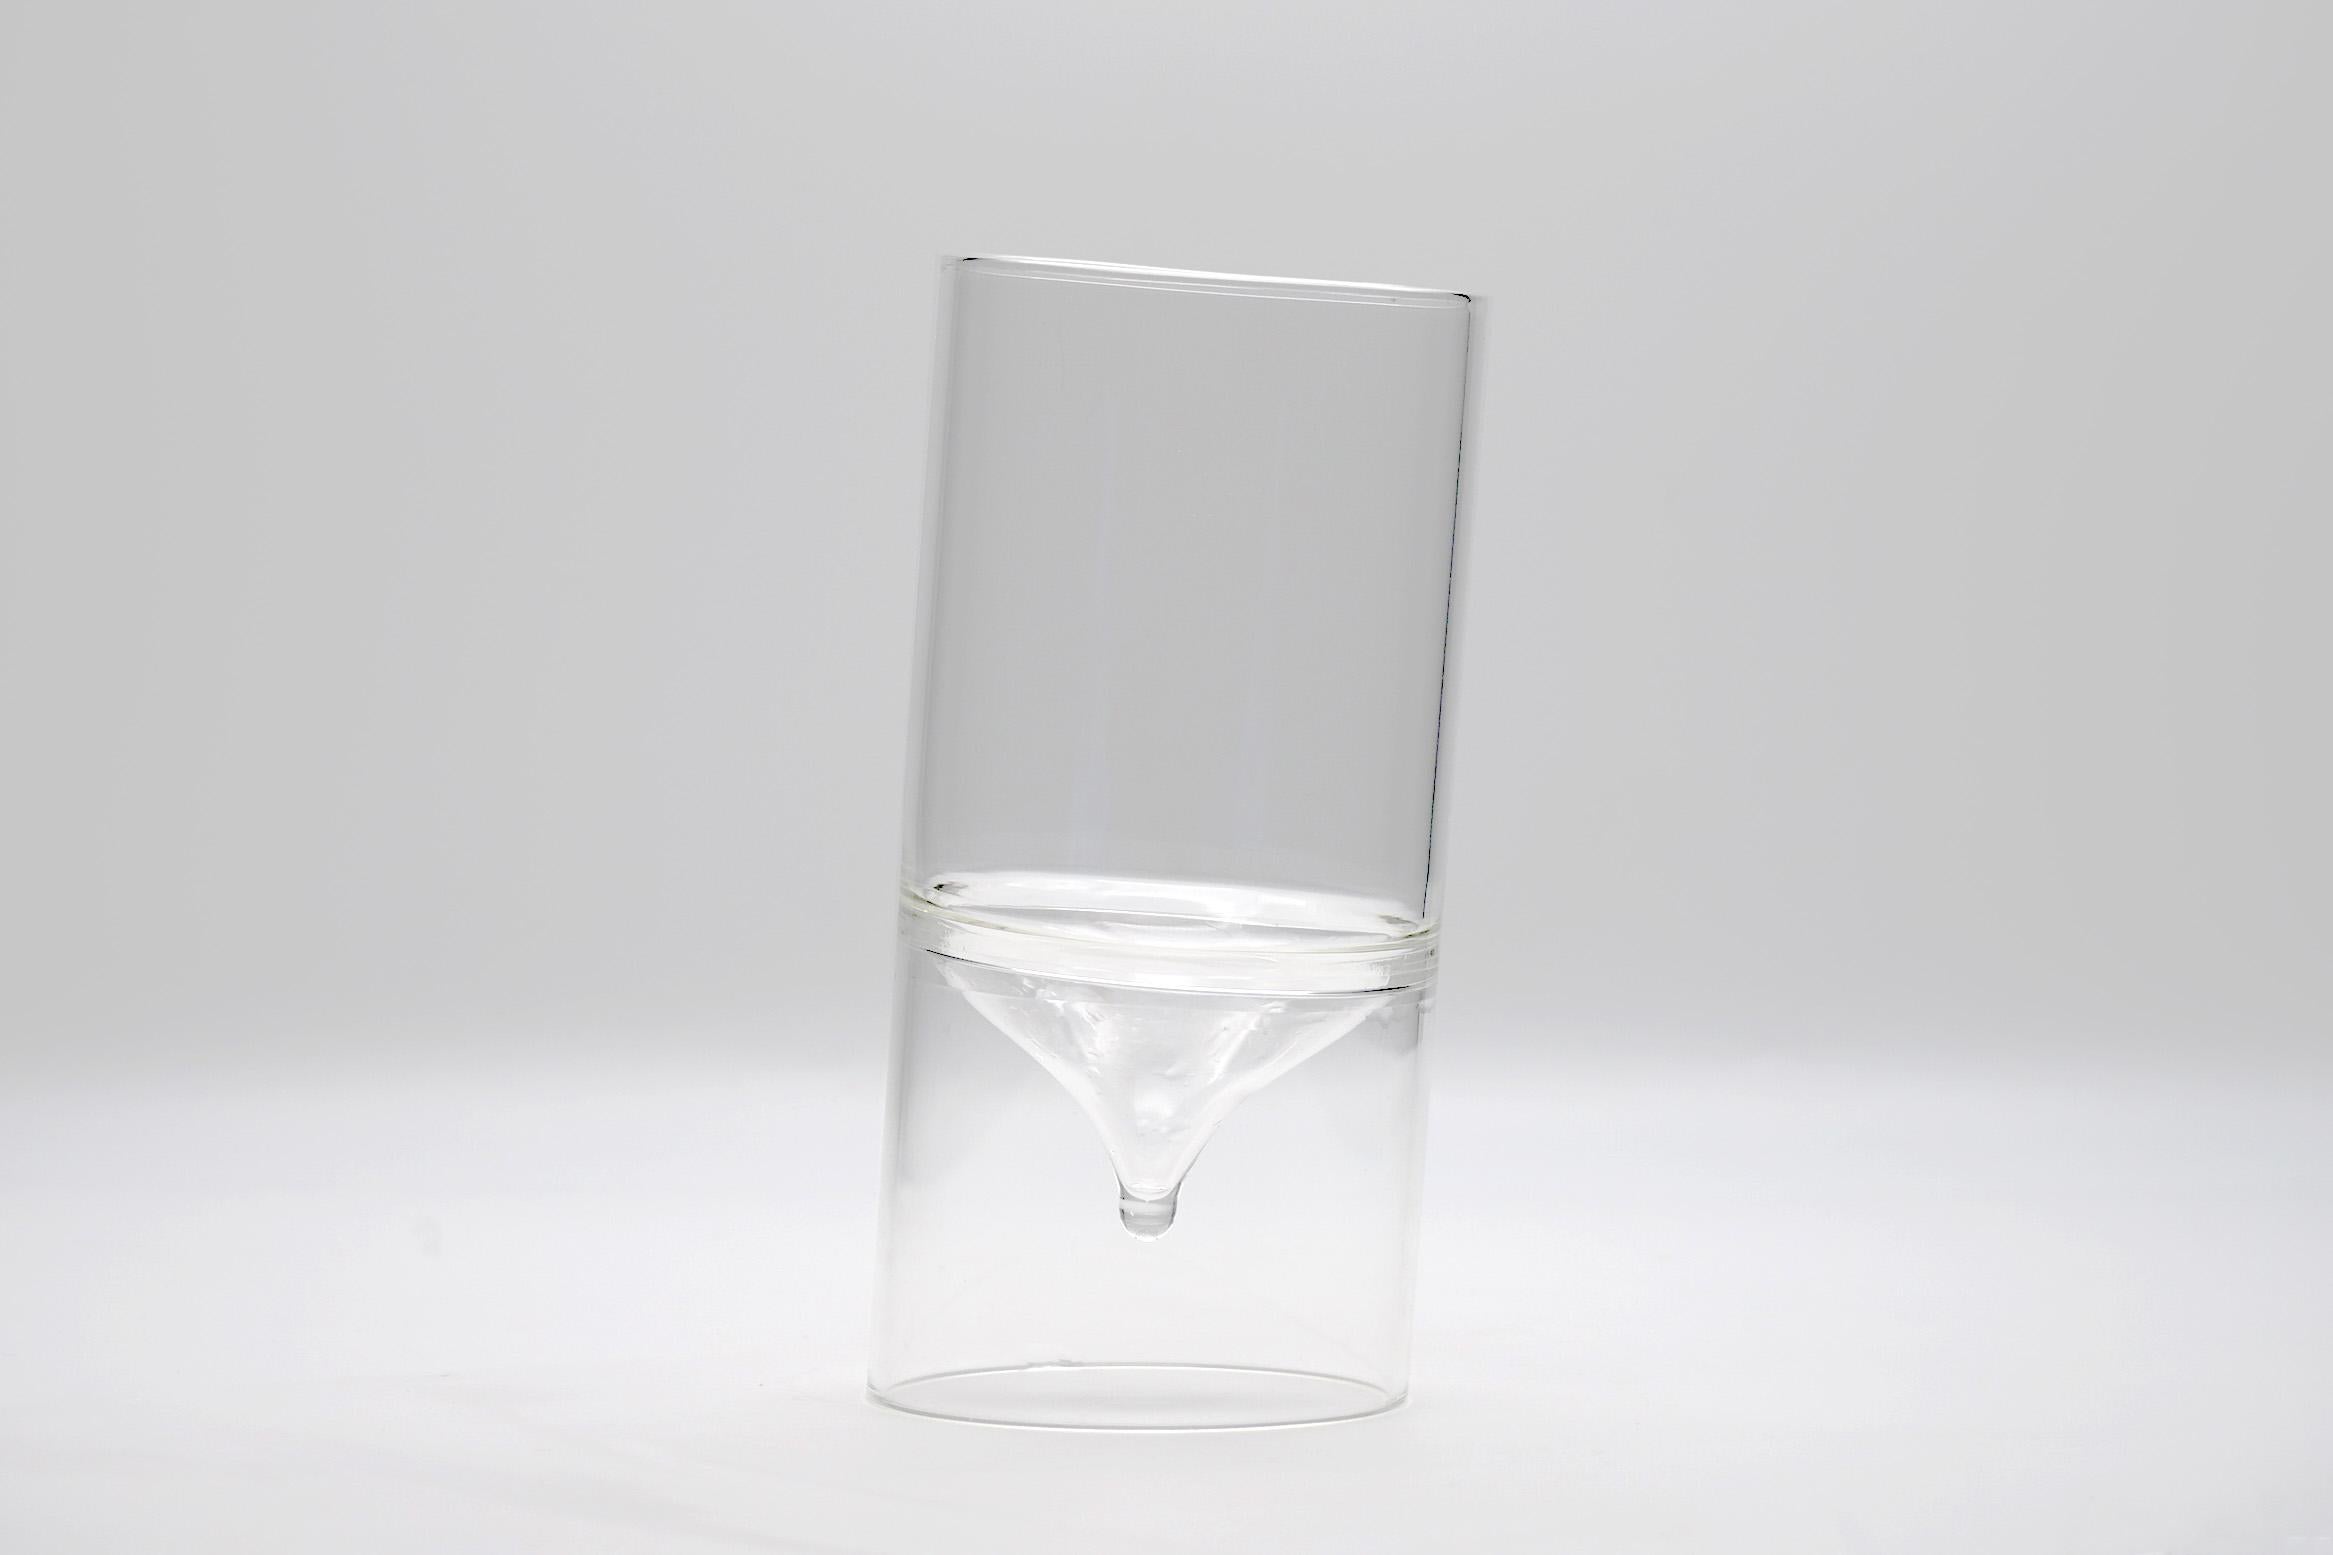 The Lido tumbler, designed by architecture firm Kanz, features an inverted dome at the bottom that tends to resemble the roof of St Mark's Basilica in Venice. Not surprisingly, the glass has been cut at the bottom to create a certain 'oriental'